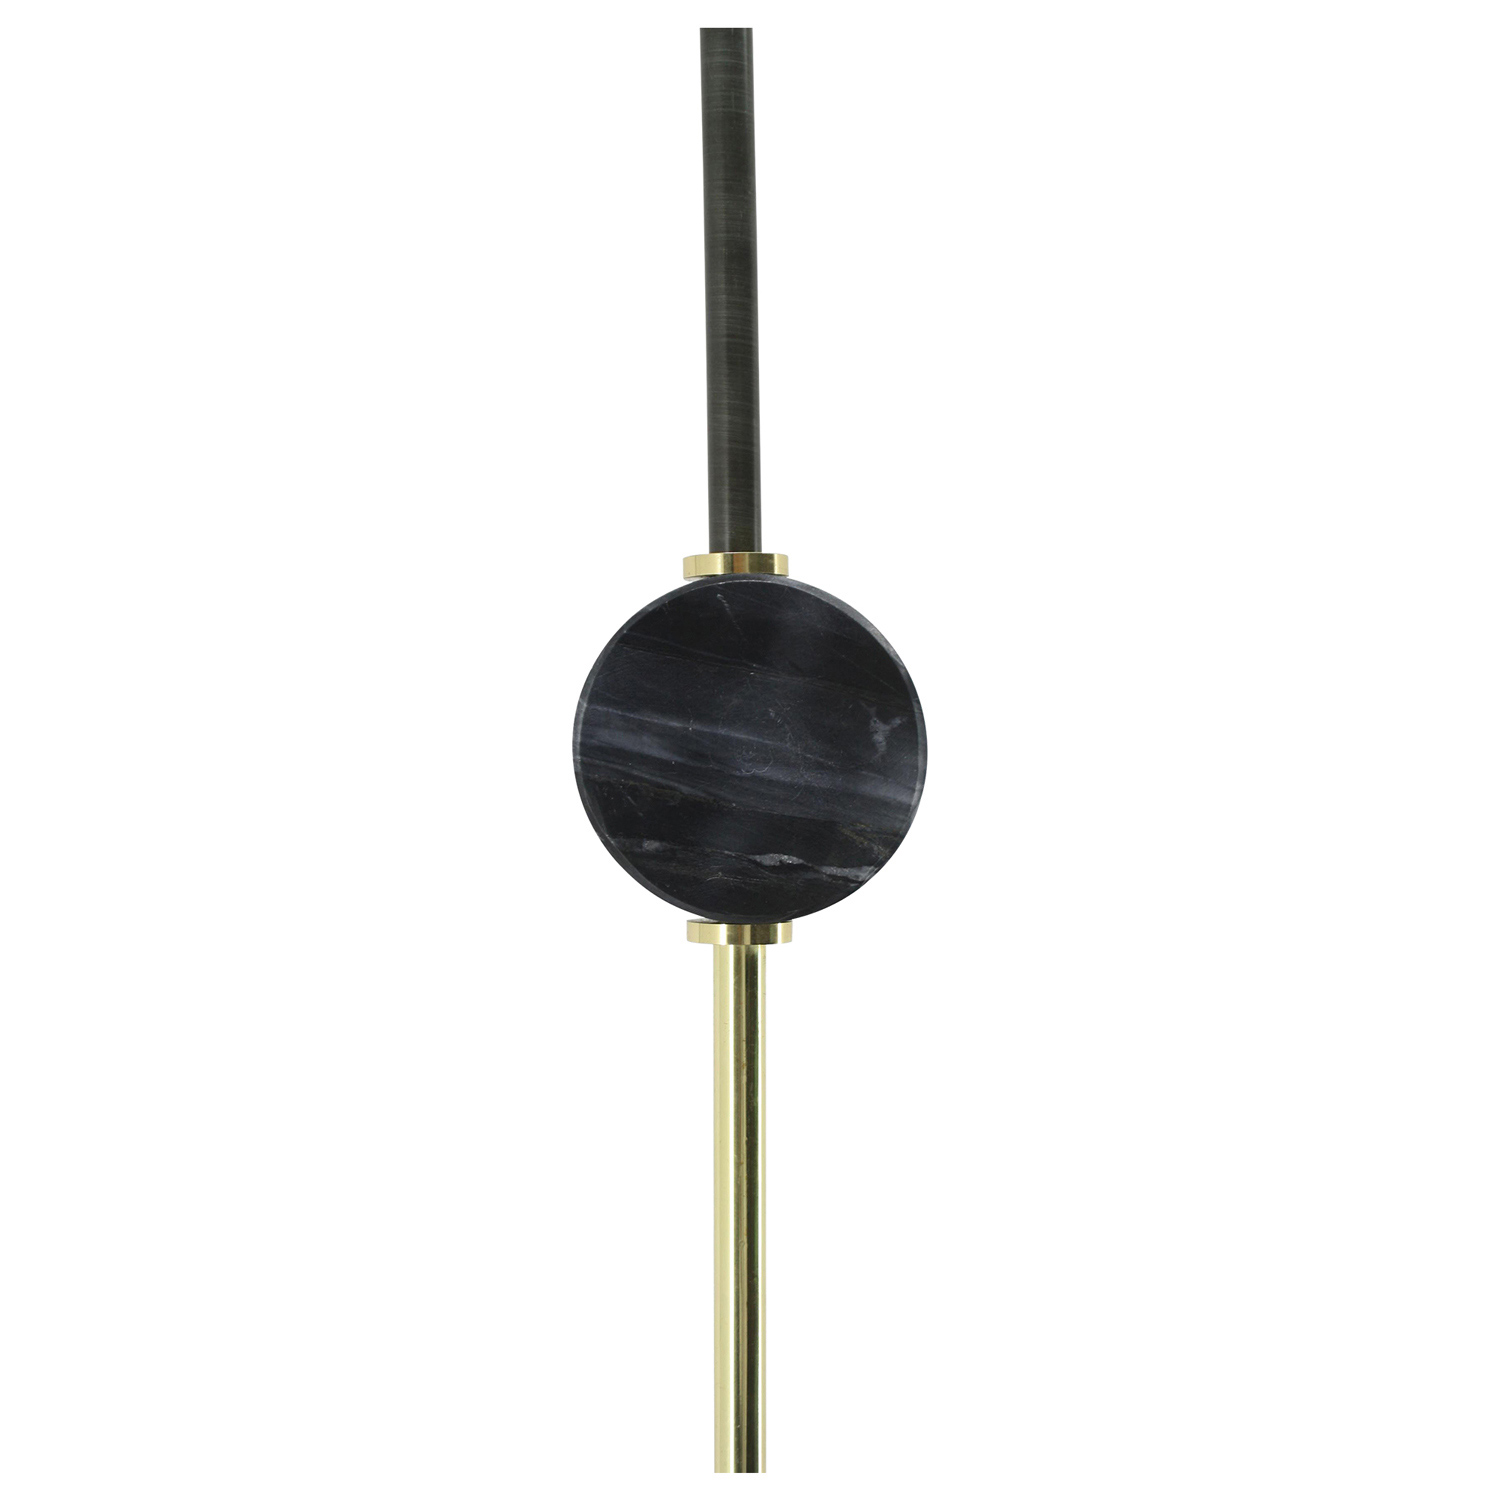 Ren-Wil Imperial Ceiling Fixture - Shiny Brass/Black Marble